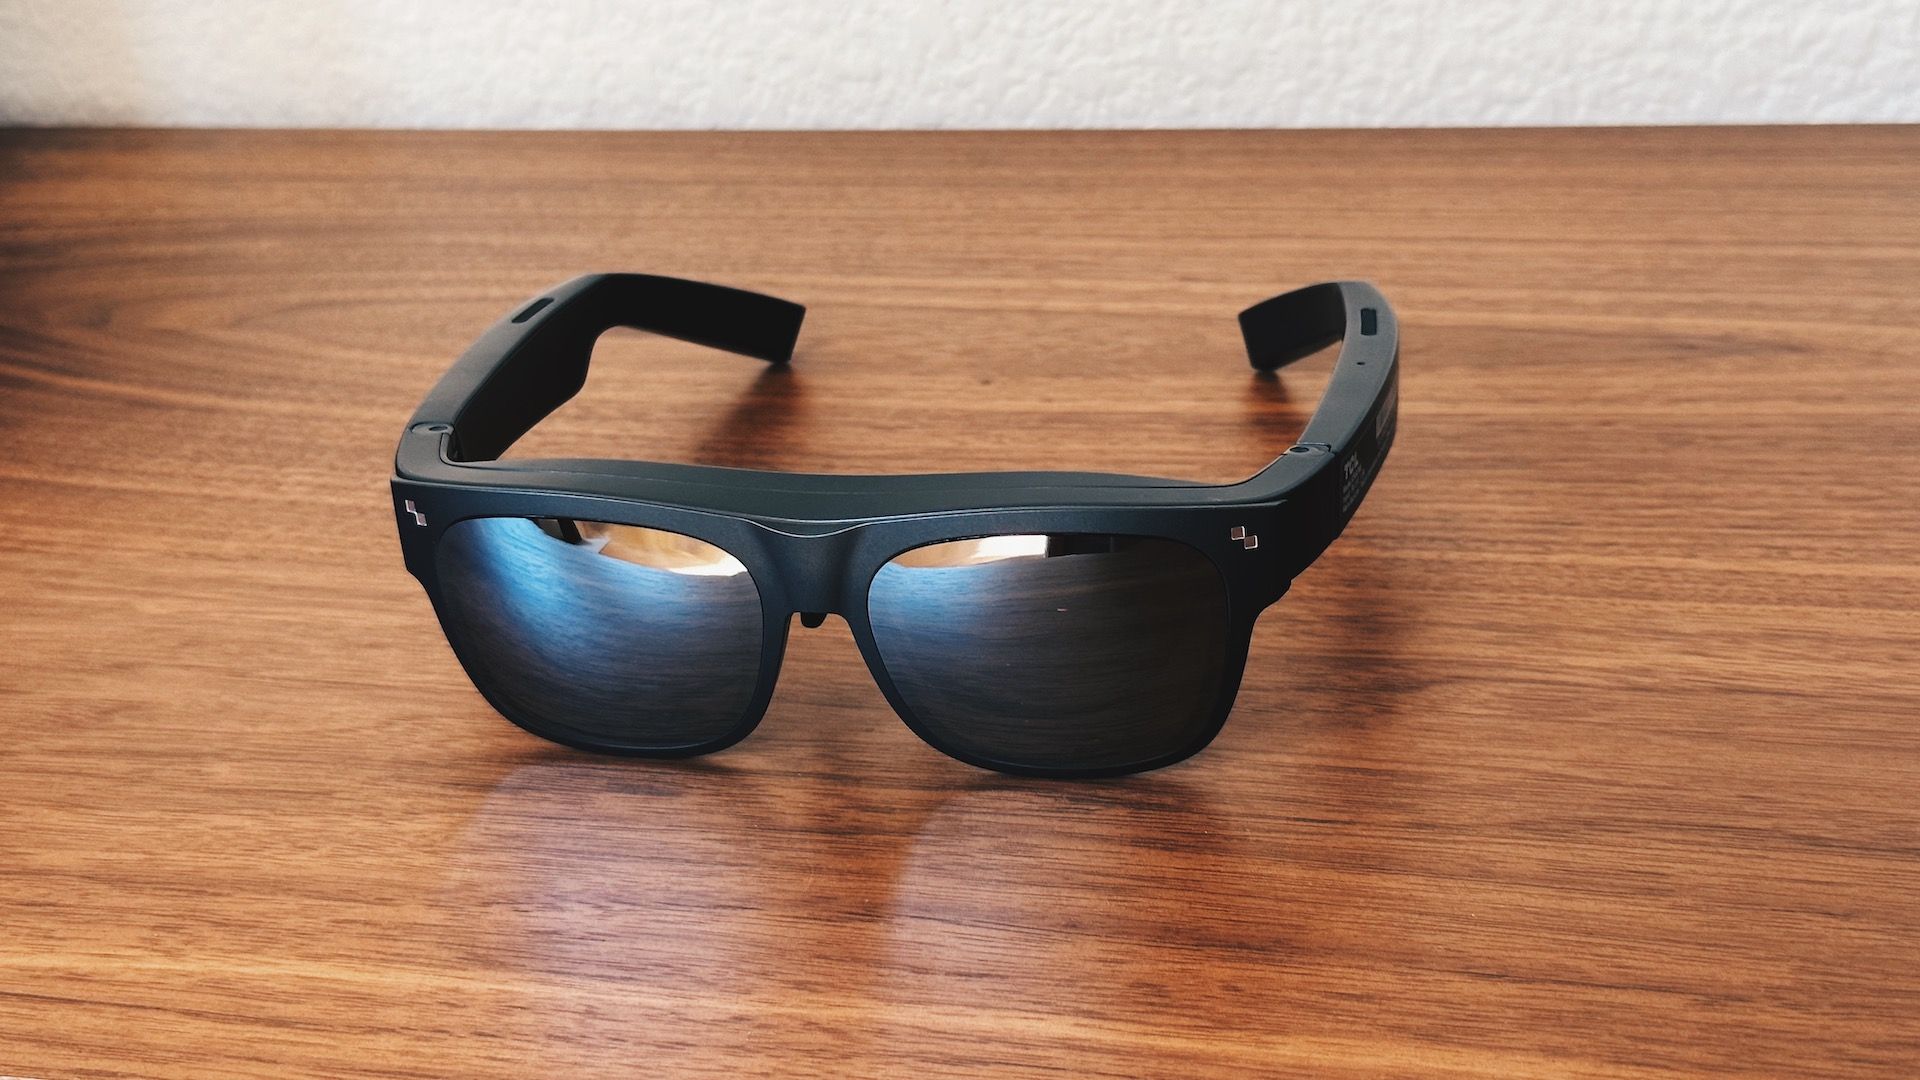 tcl-nxtwear-s-review:-smart-glasses-with-simple-vision